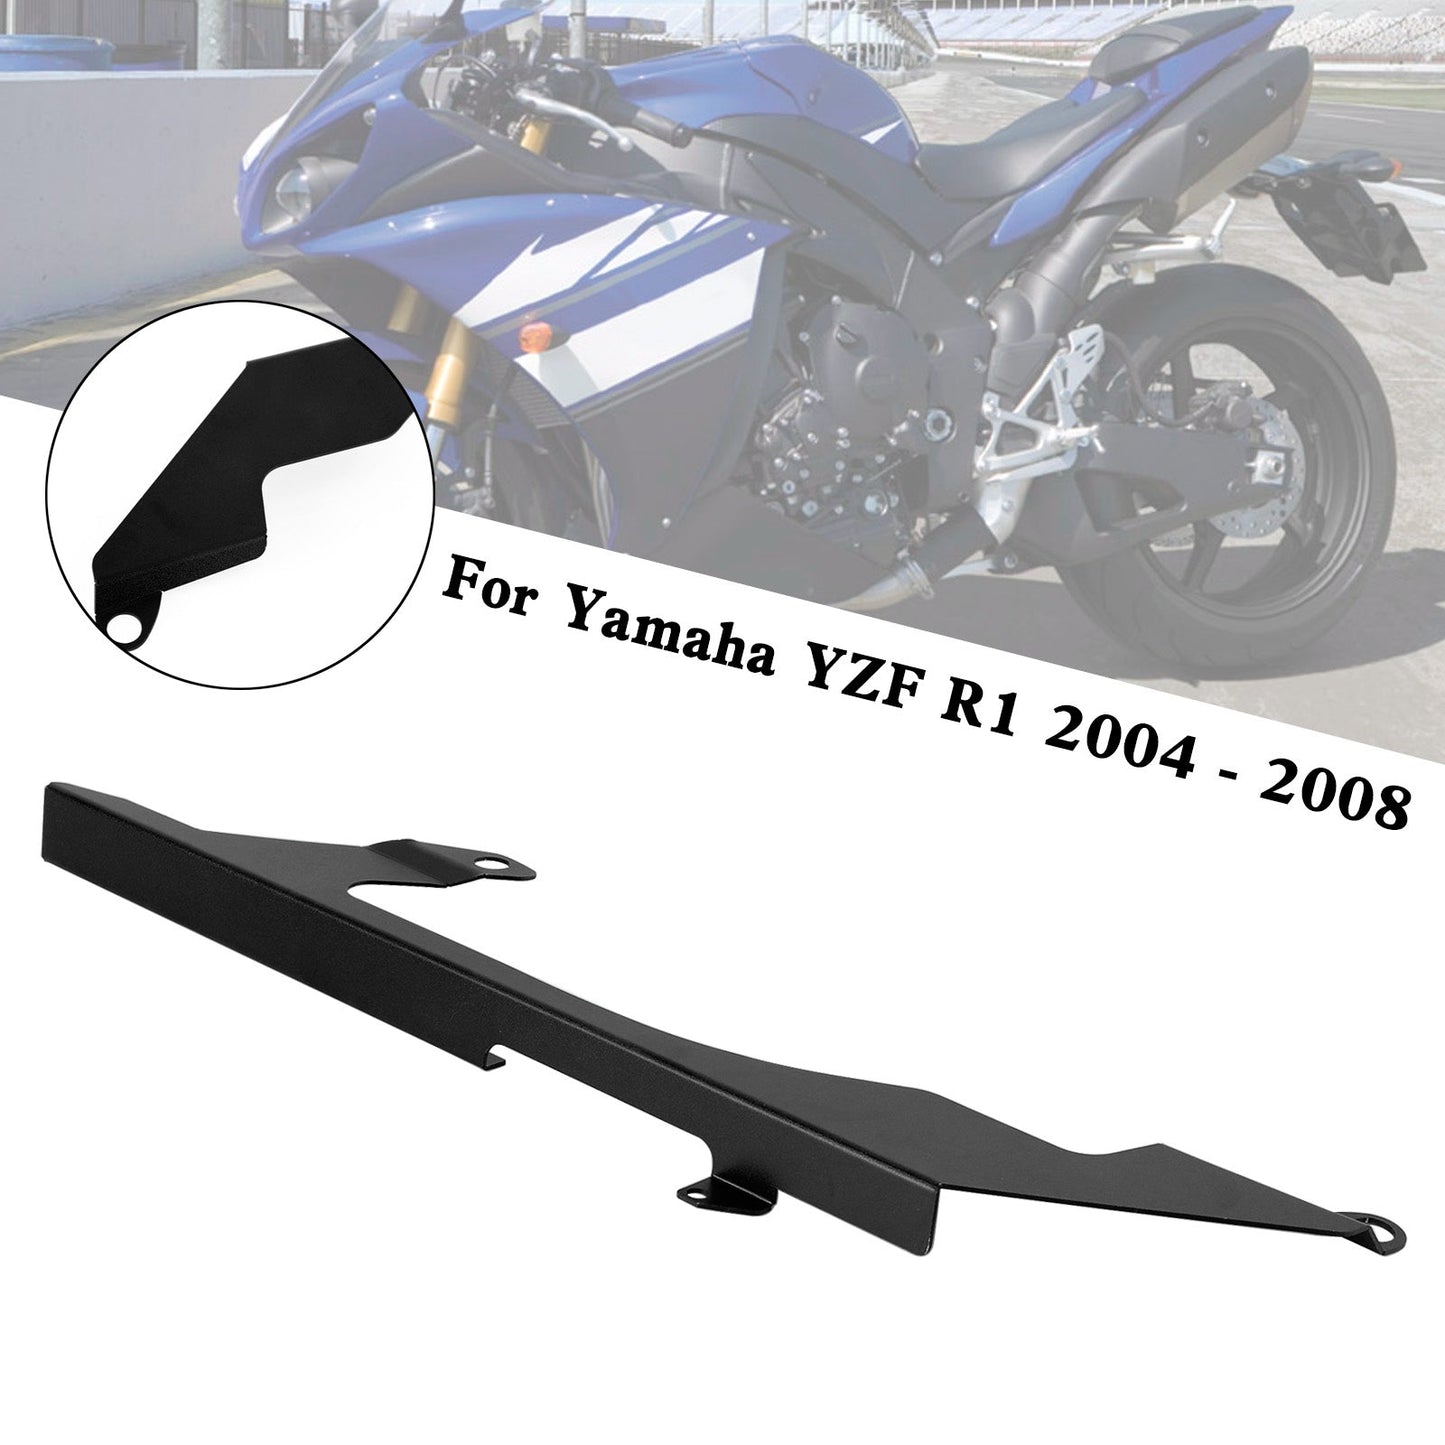 Rear Sprocket Chain Guard Protector Cover For Yamaha YZF R1 2004-2008 Black